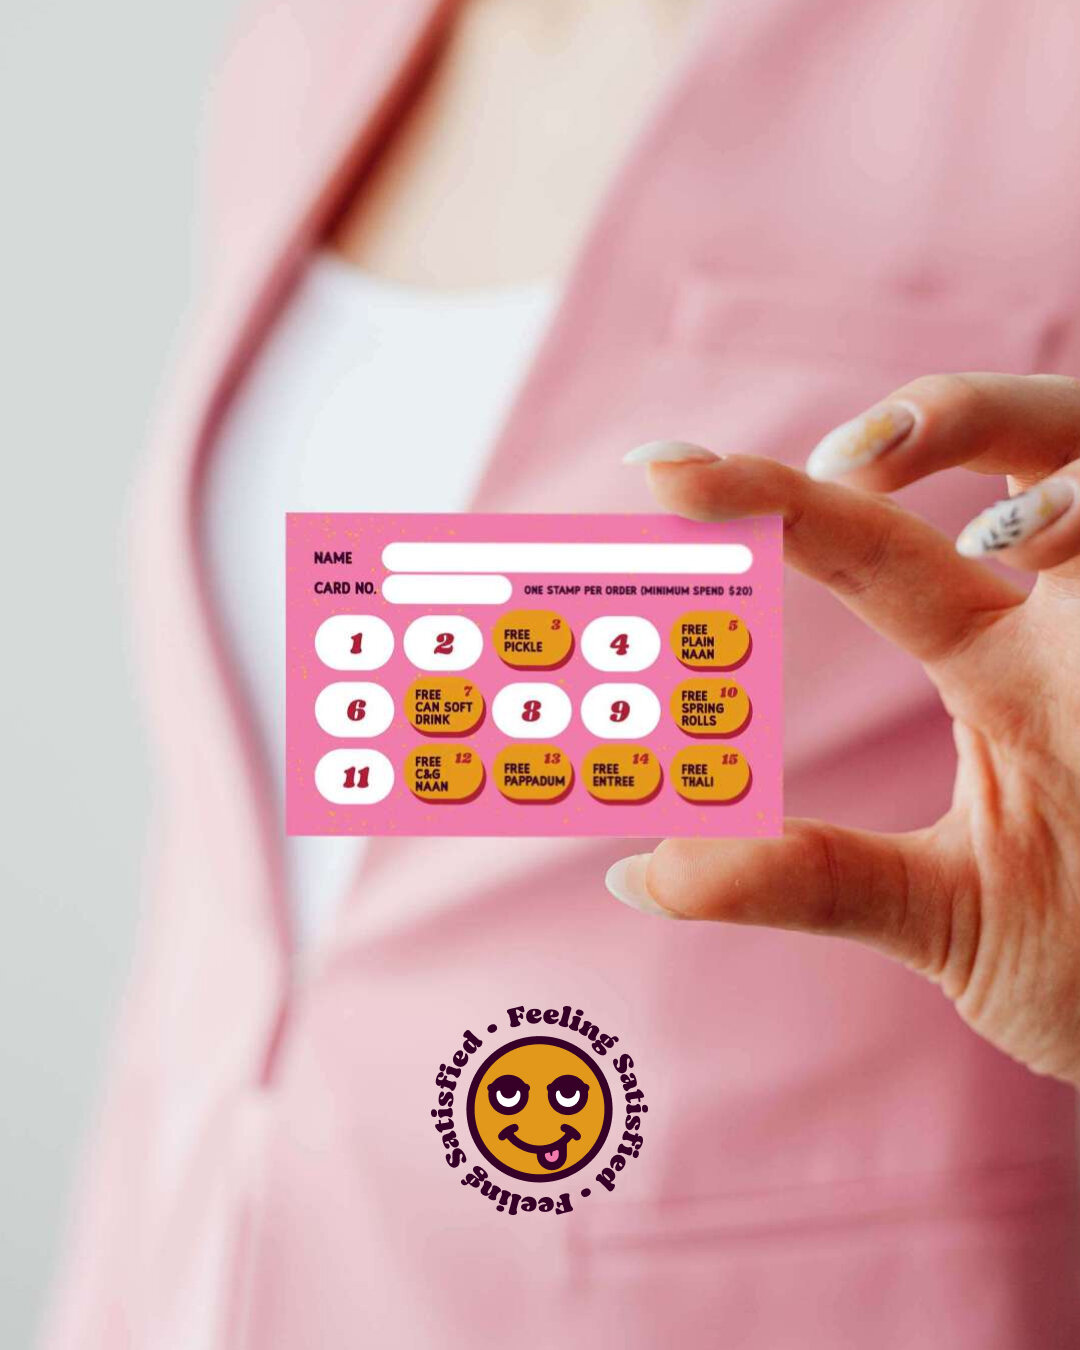 🤑 Get your hands on our loyalty card and earn rewards for every visit to Thali Dhaba!

#ThaliDhaba #LoyaltyRewards #IndianFood #TastyTreats #DeliciousEats